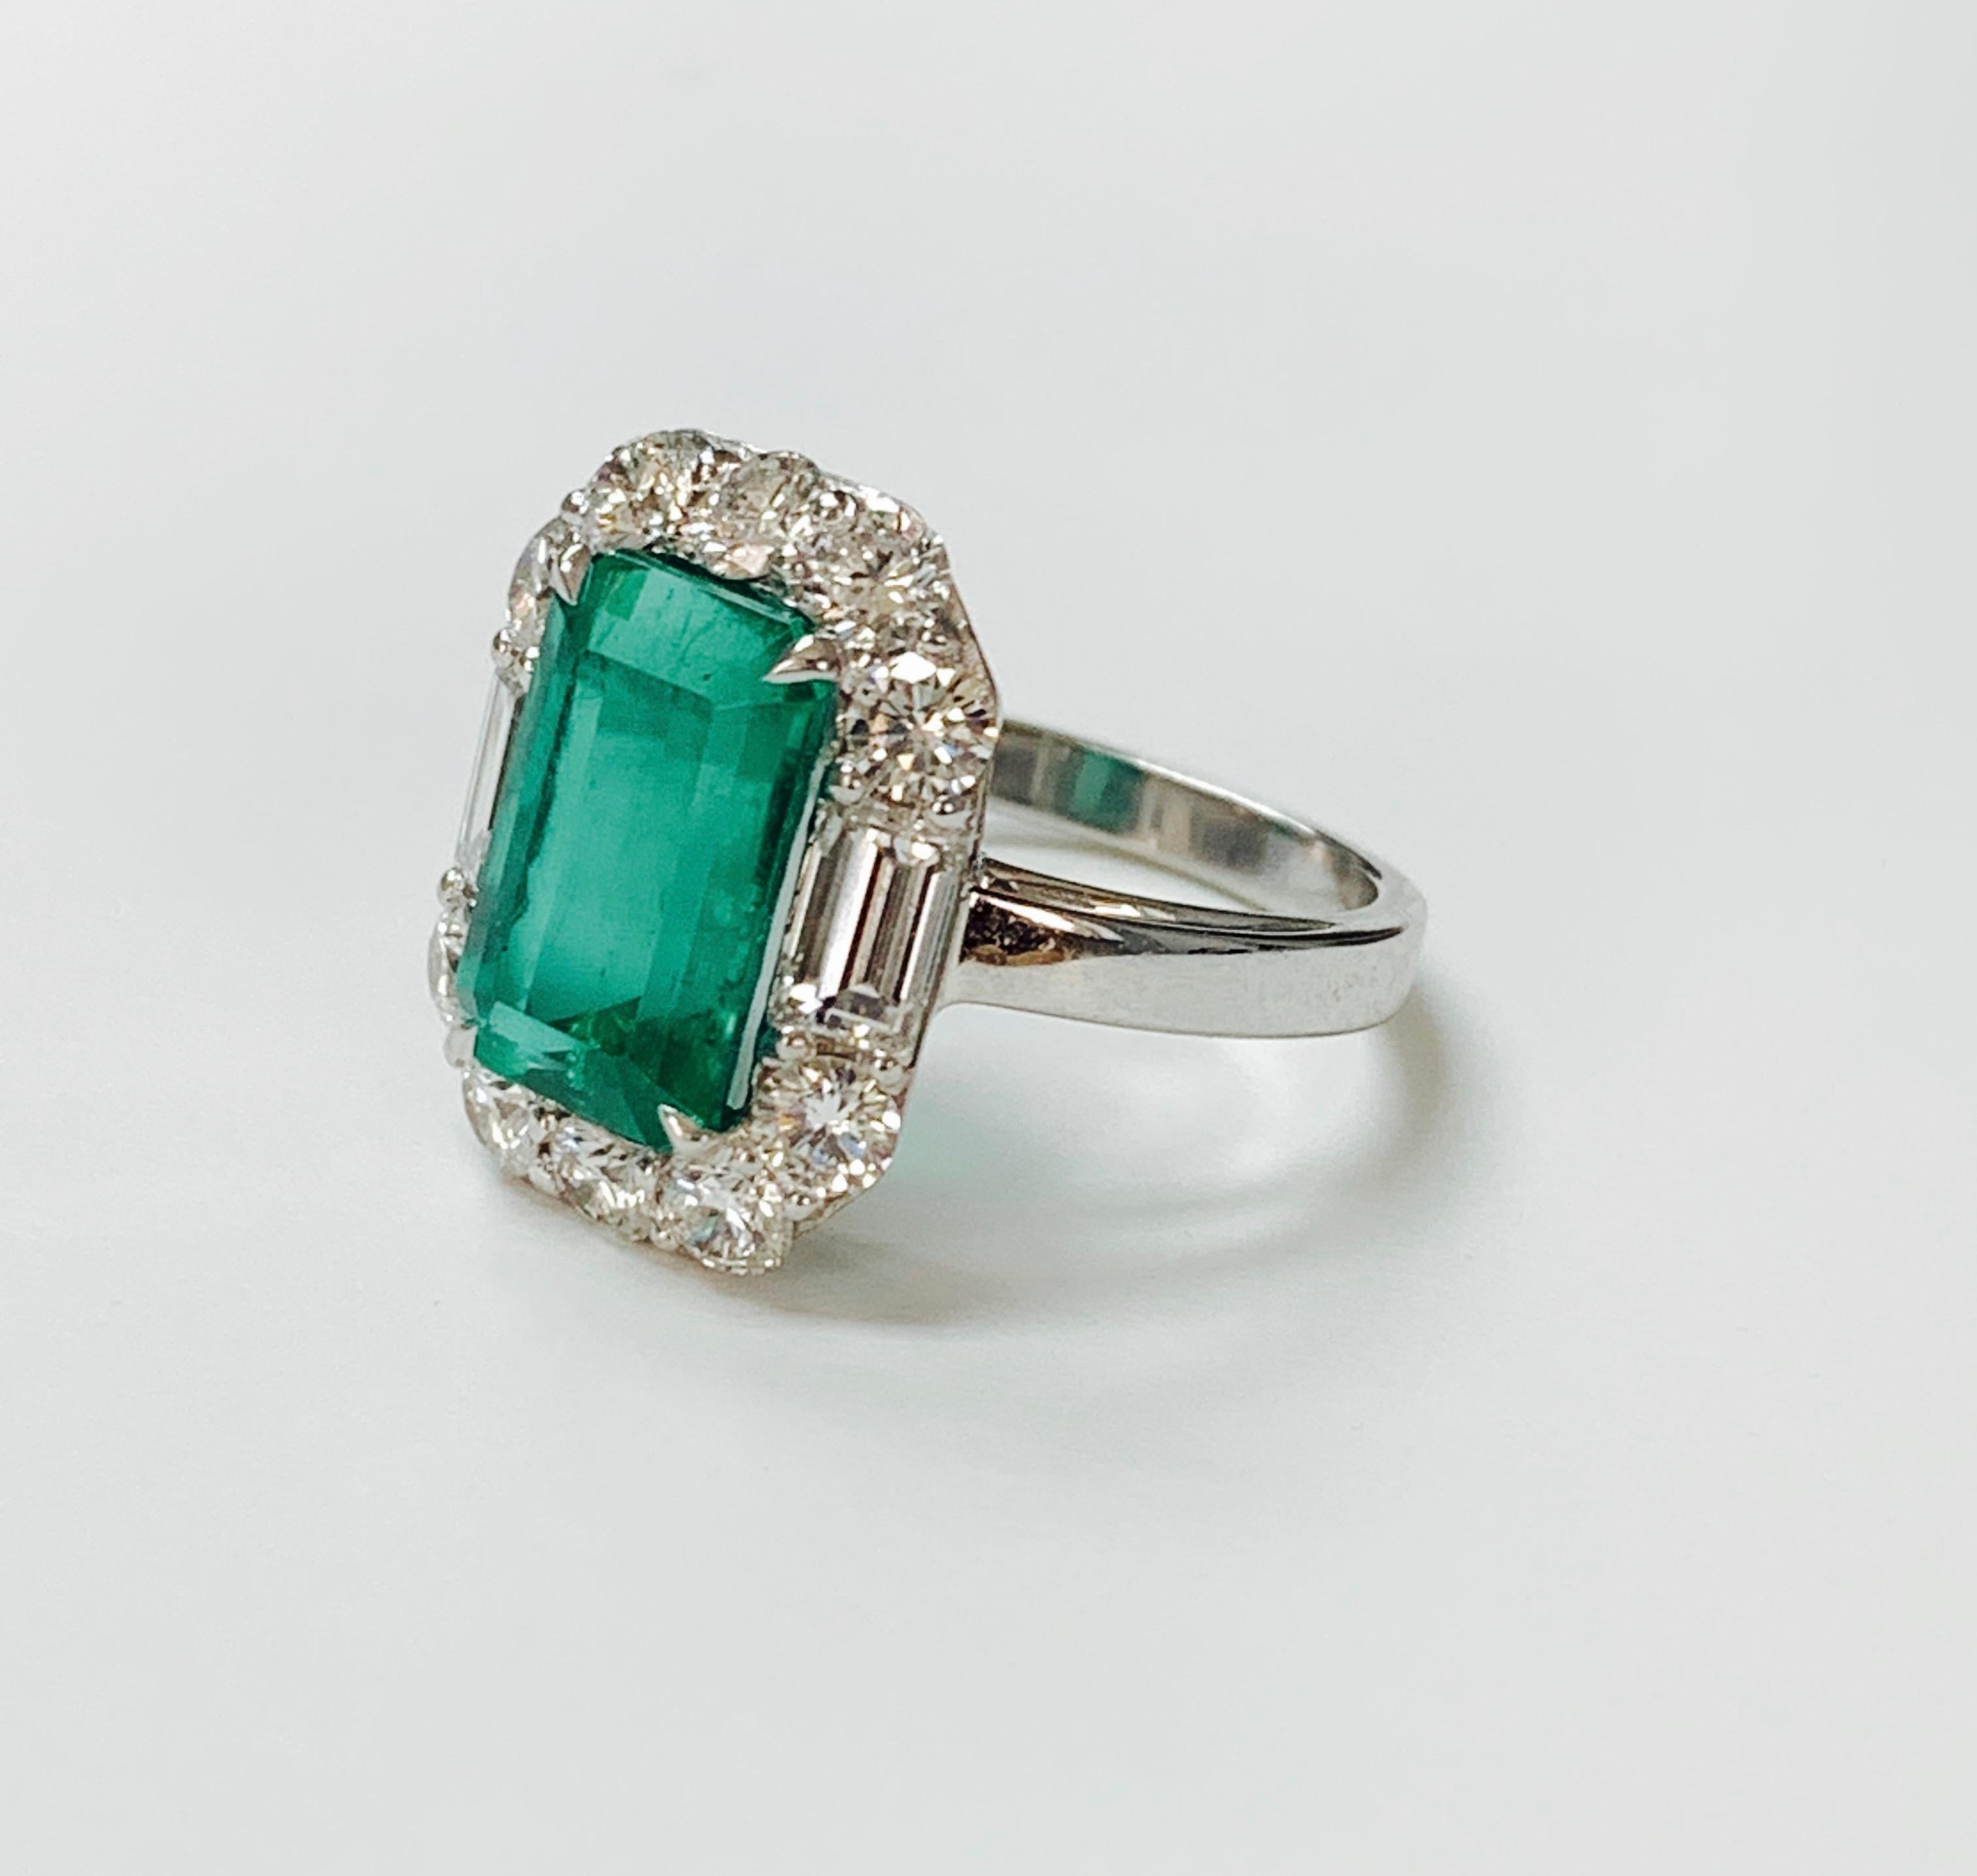 Contemporary GIA Certified 3.63 Carat Colombian Emerald and Diamond Ring in 18k White Gold